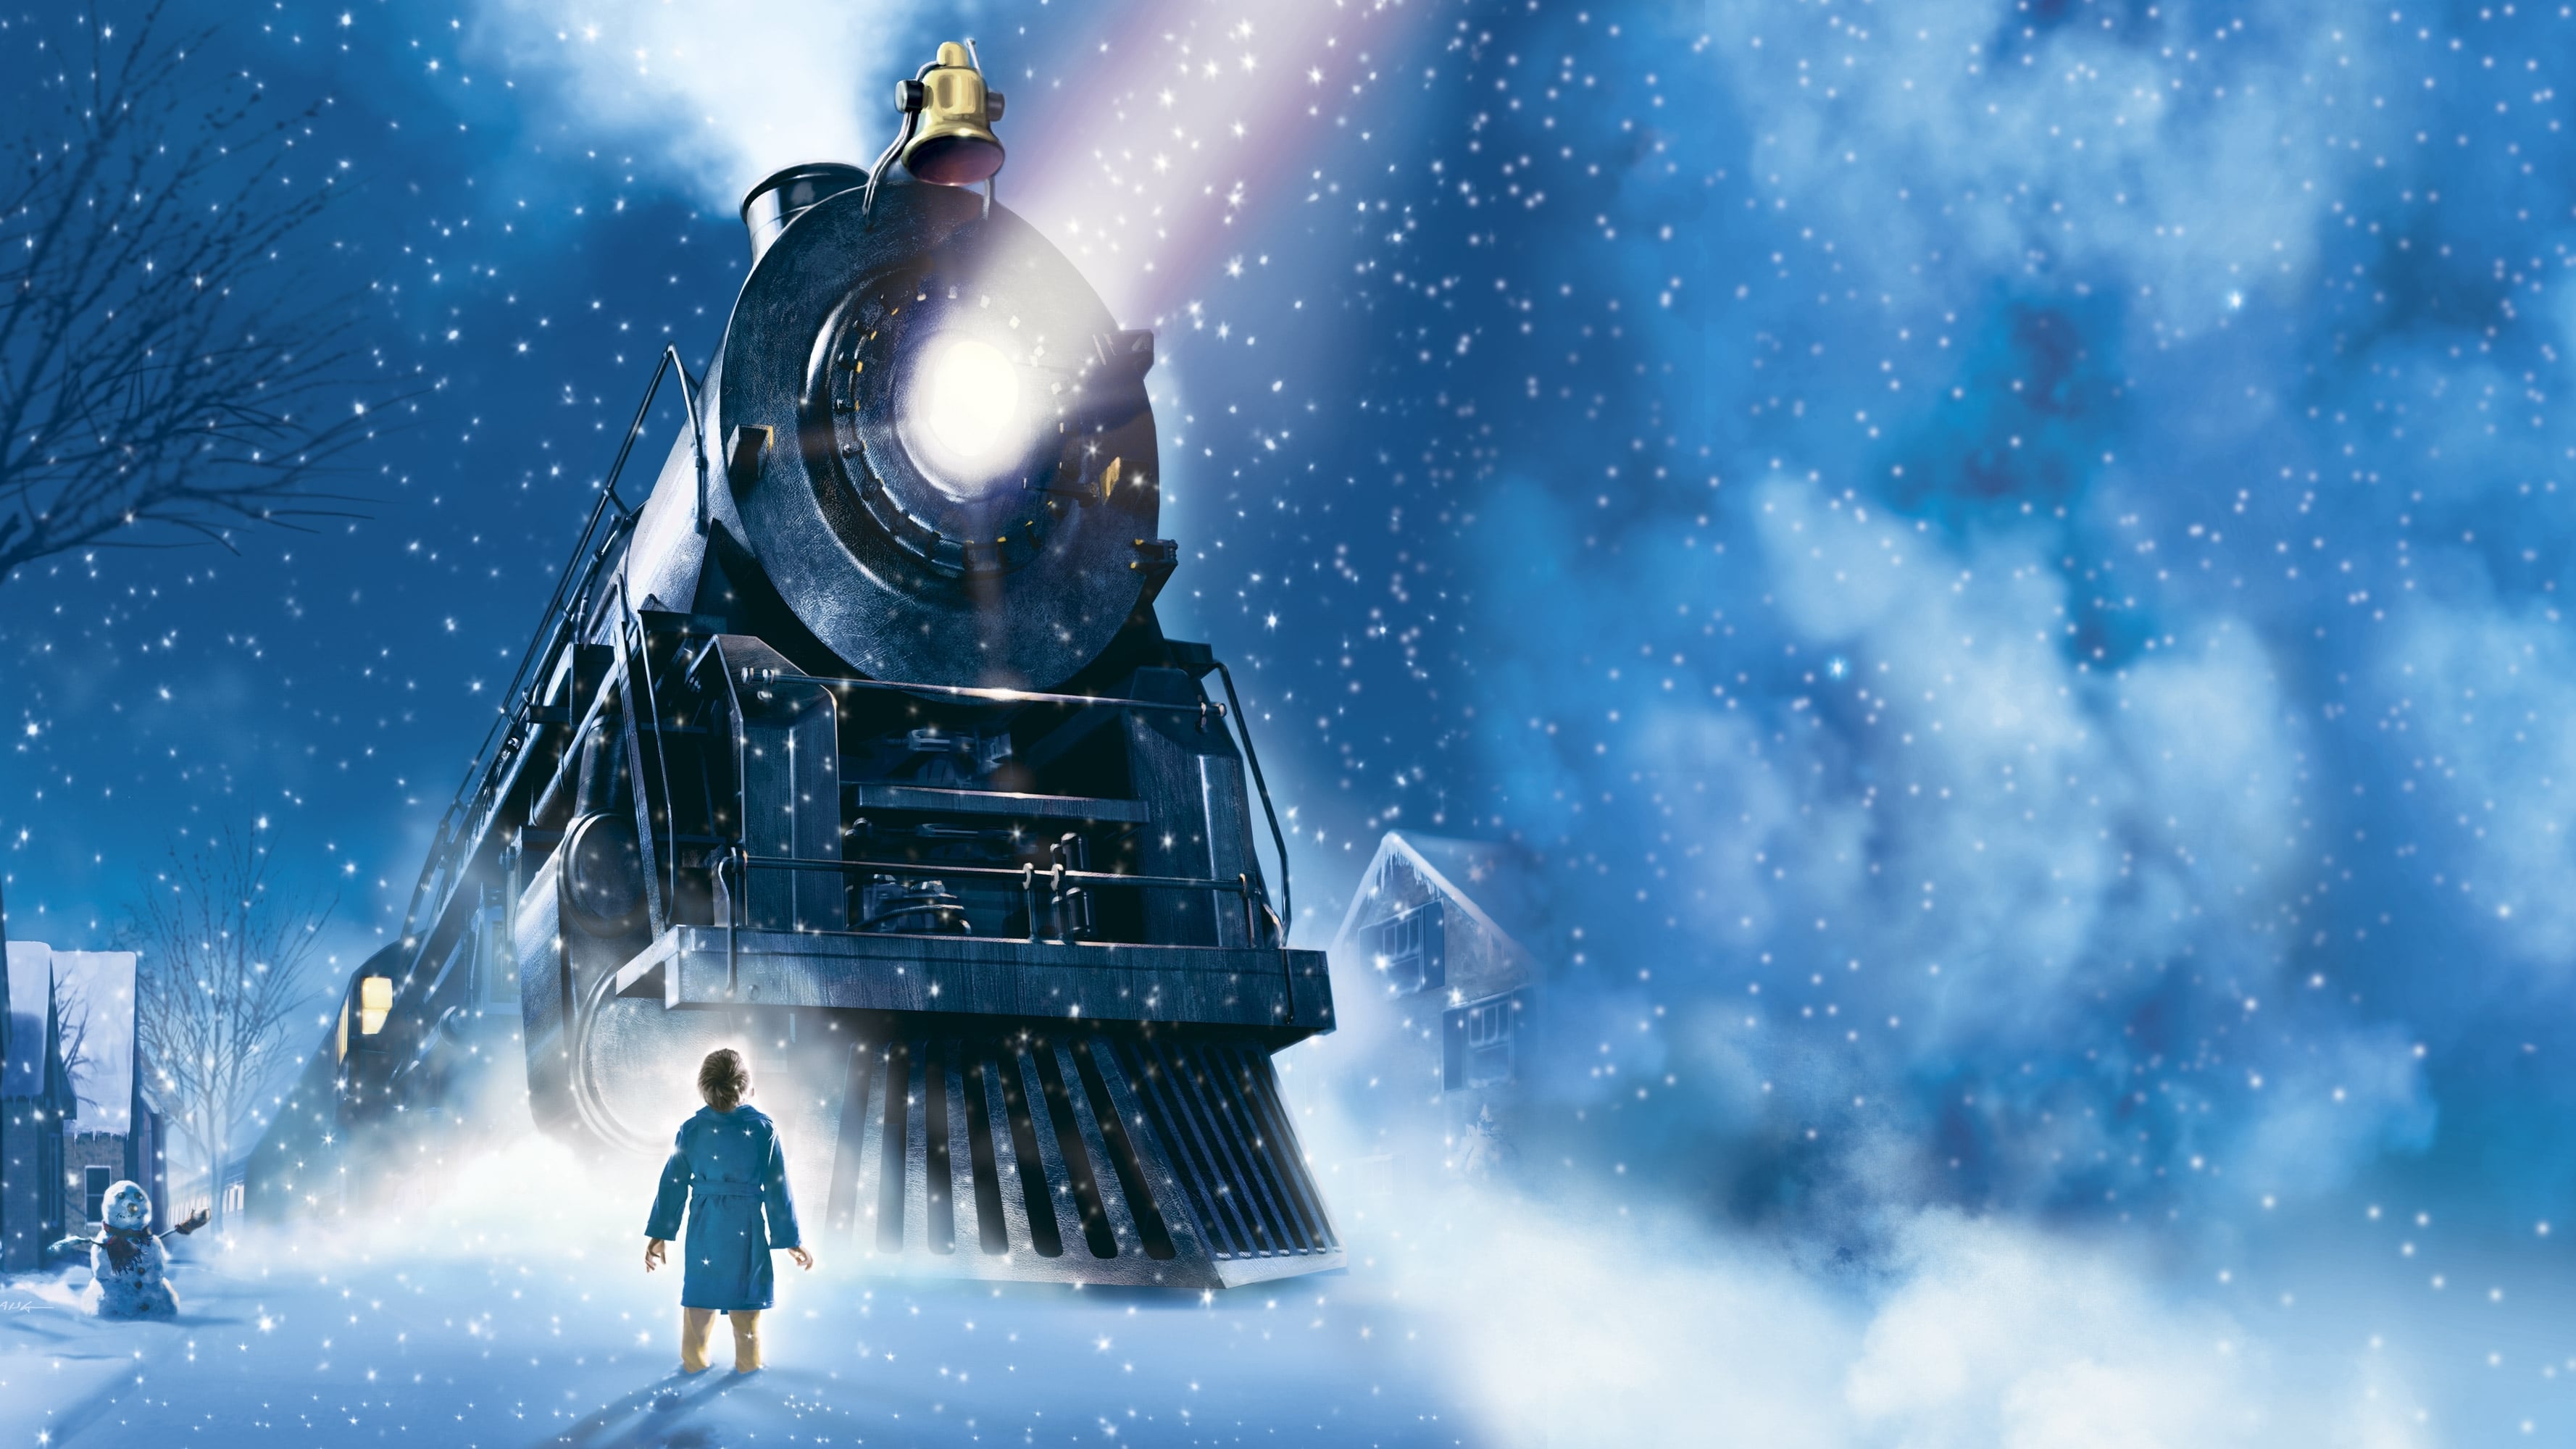 the polar express free movie download hd